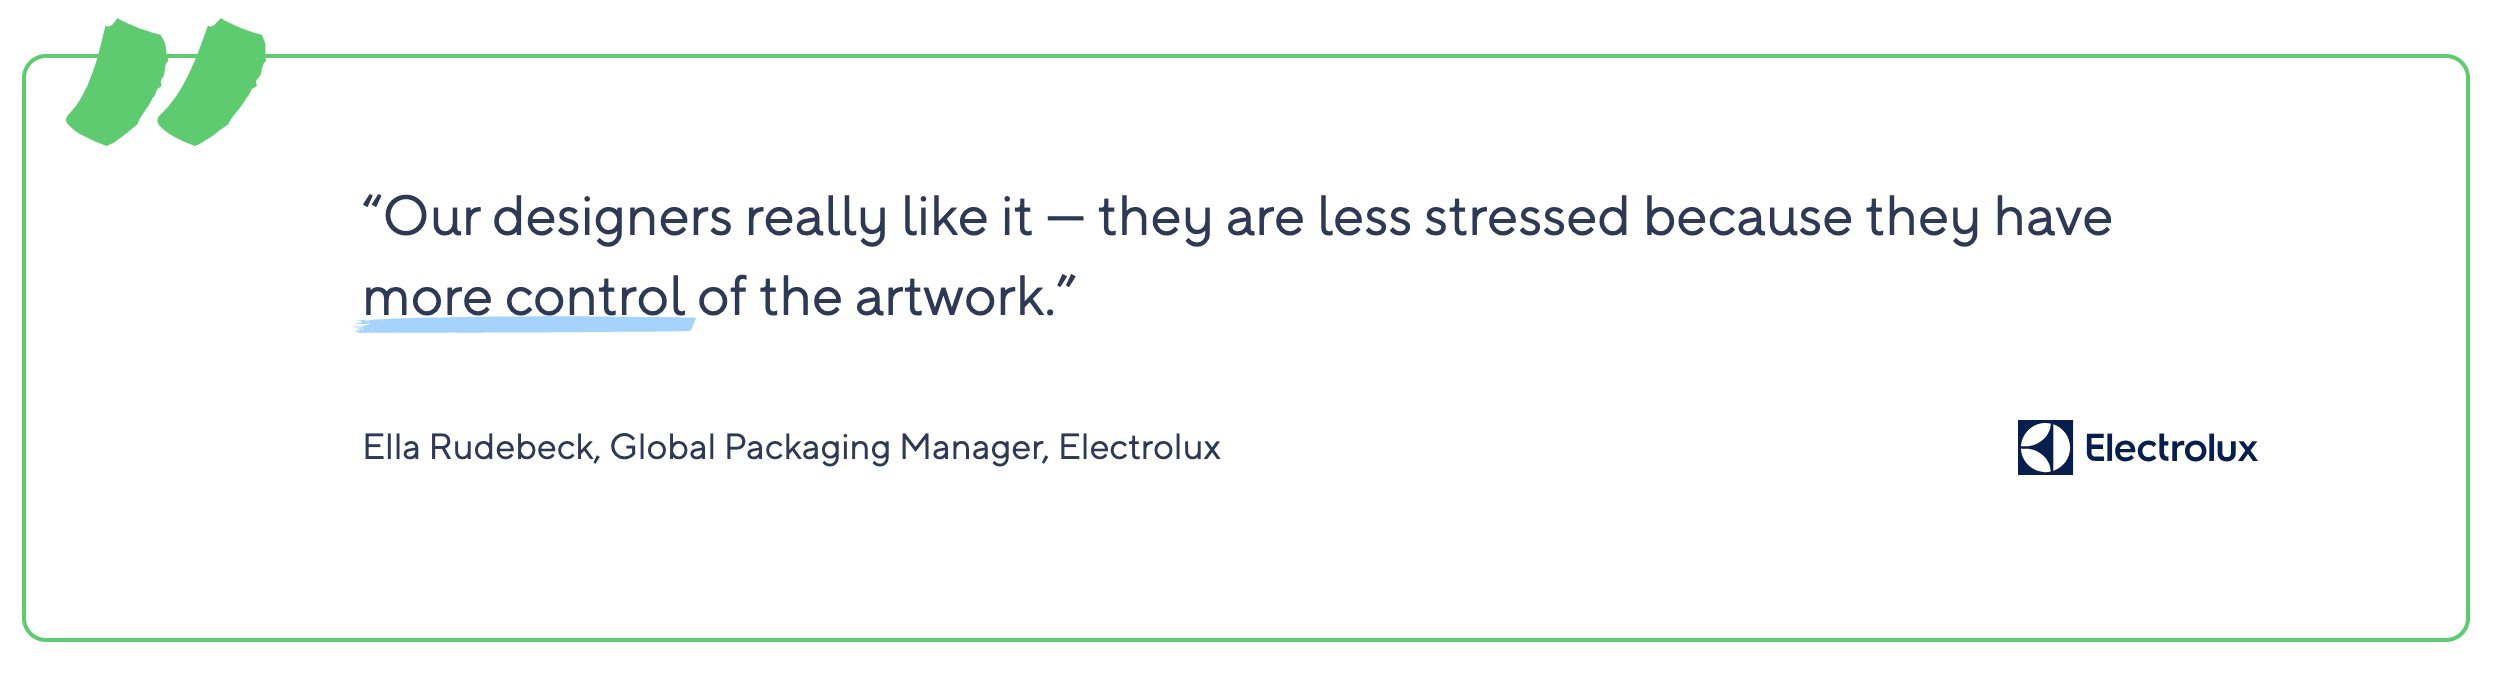 electrolux quote